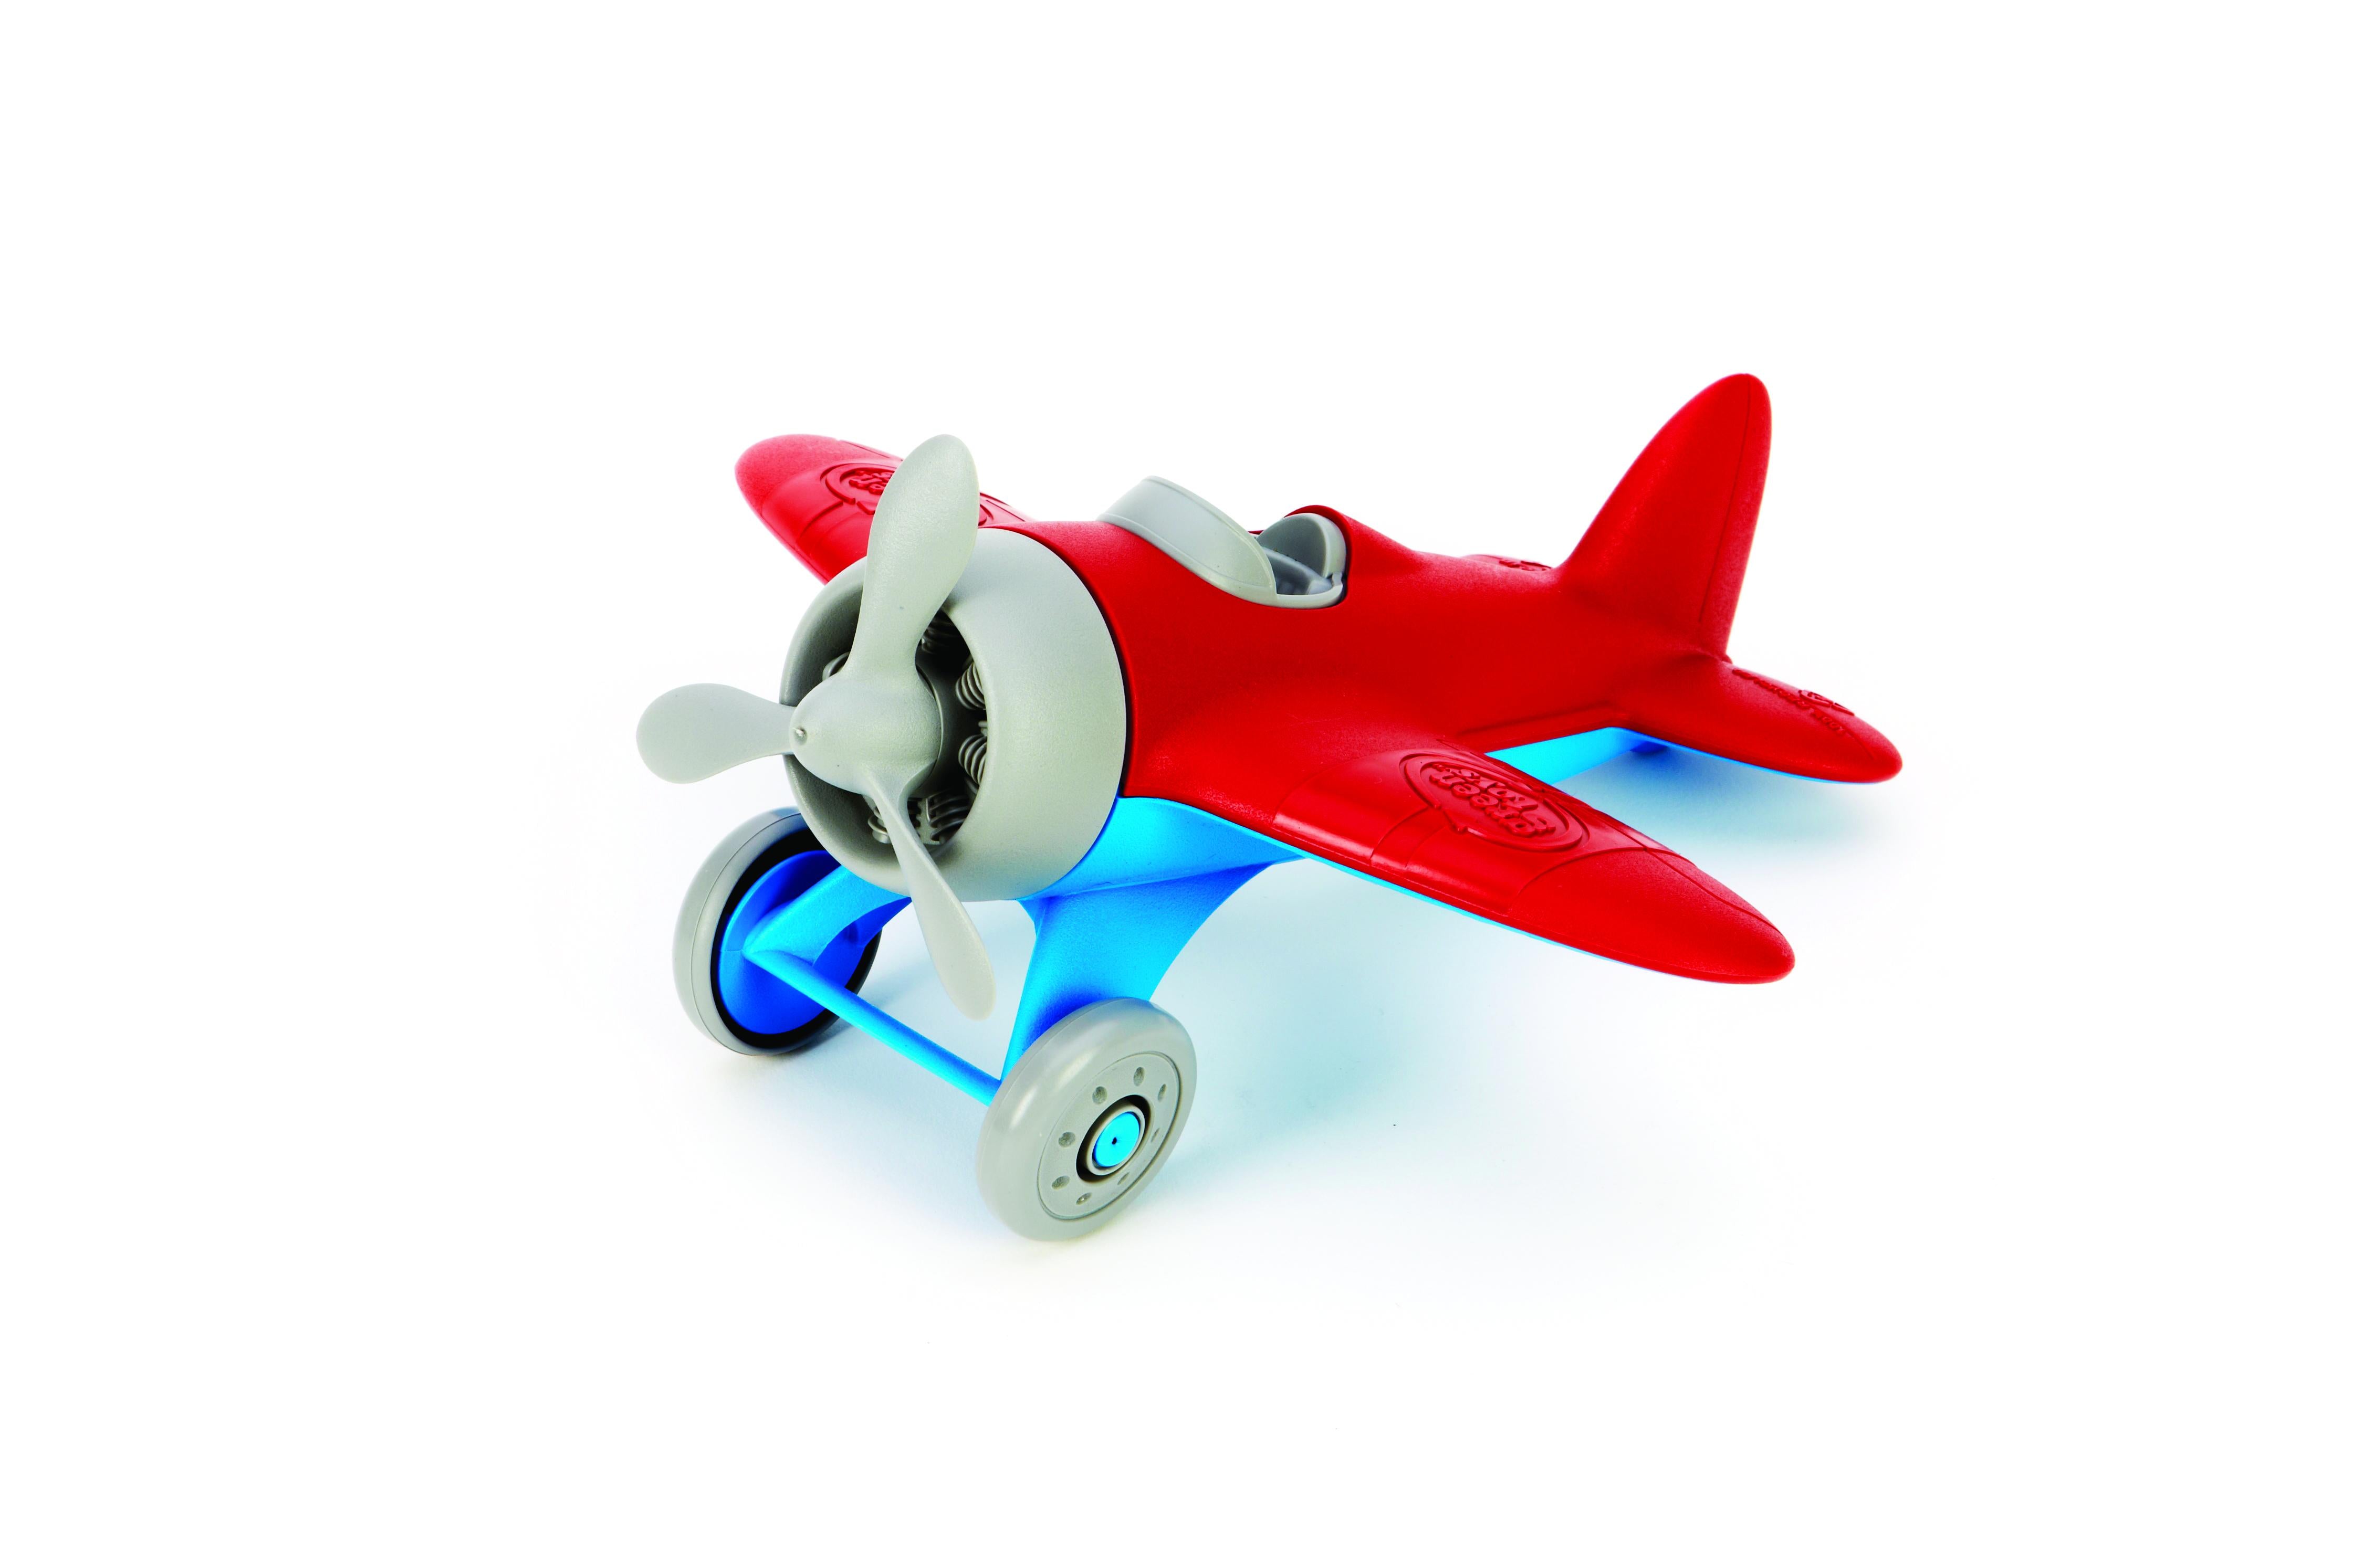 Green Toys Eco Friendly Airplane made from recycled plastic